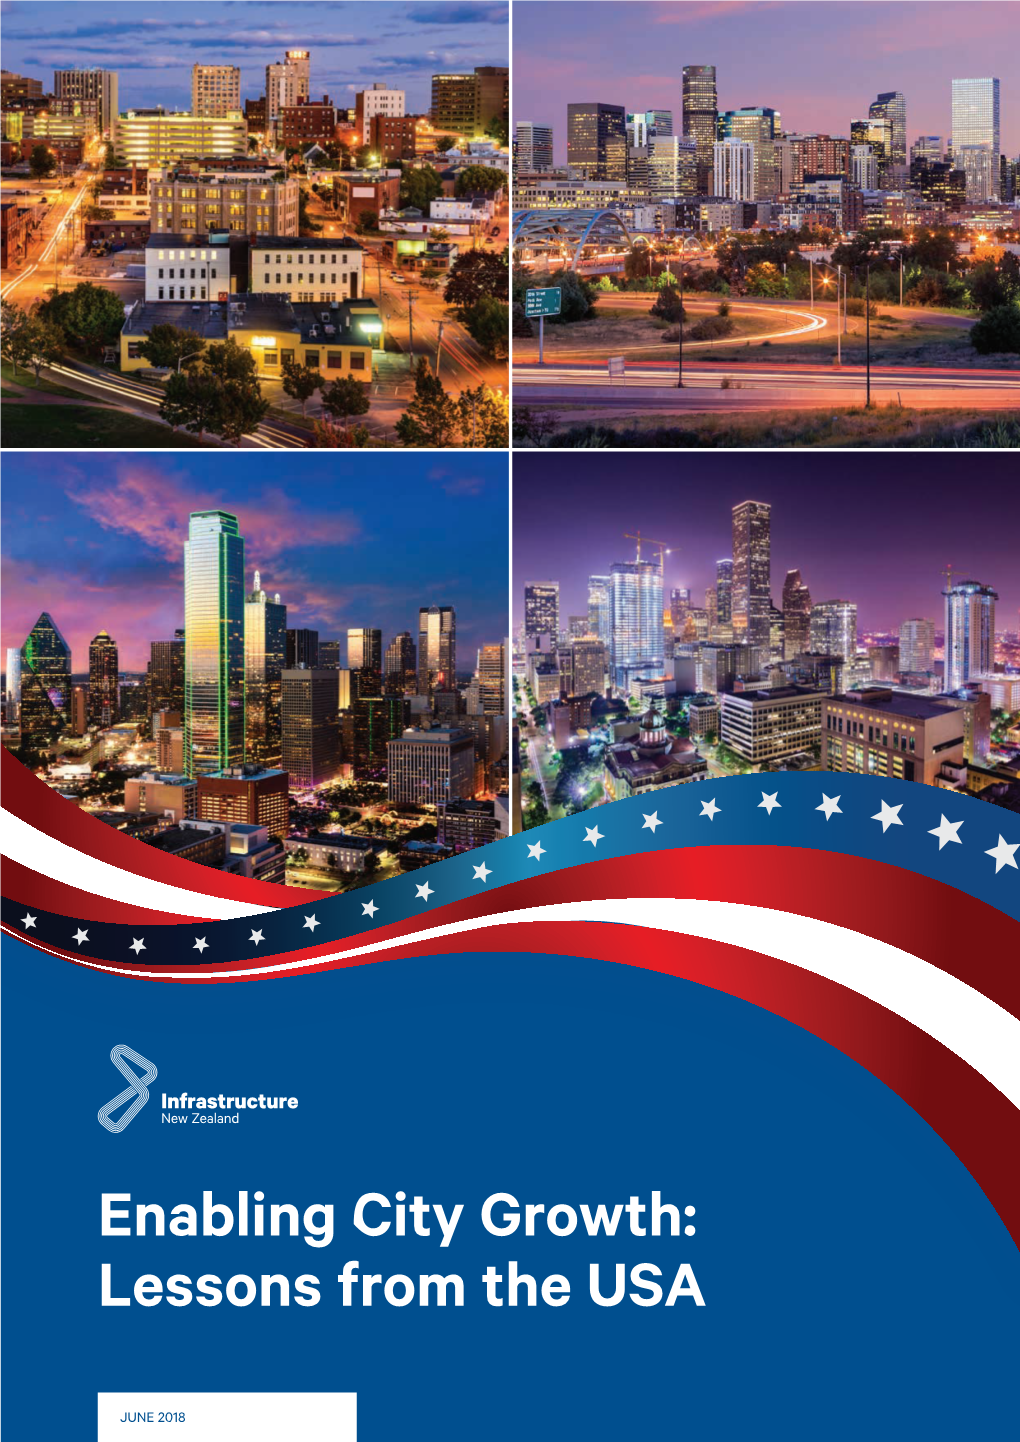 Enabling City Growth: Lessons from the USA